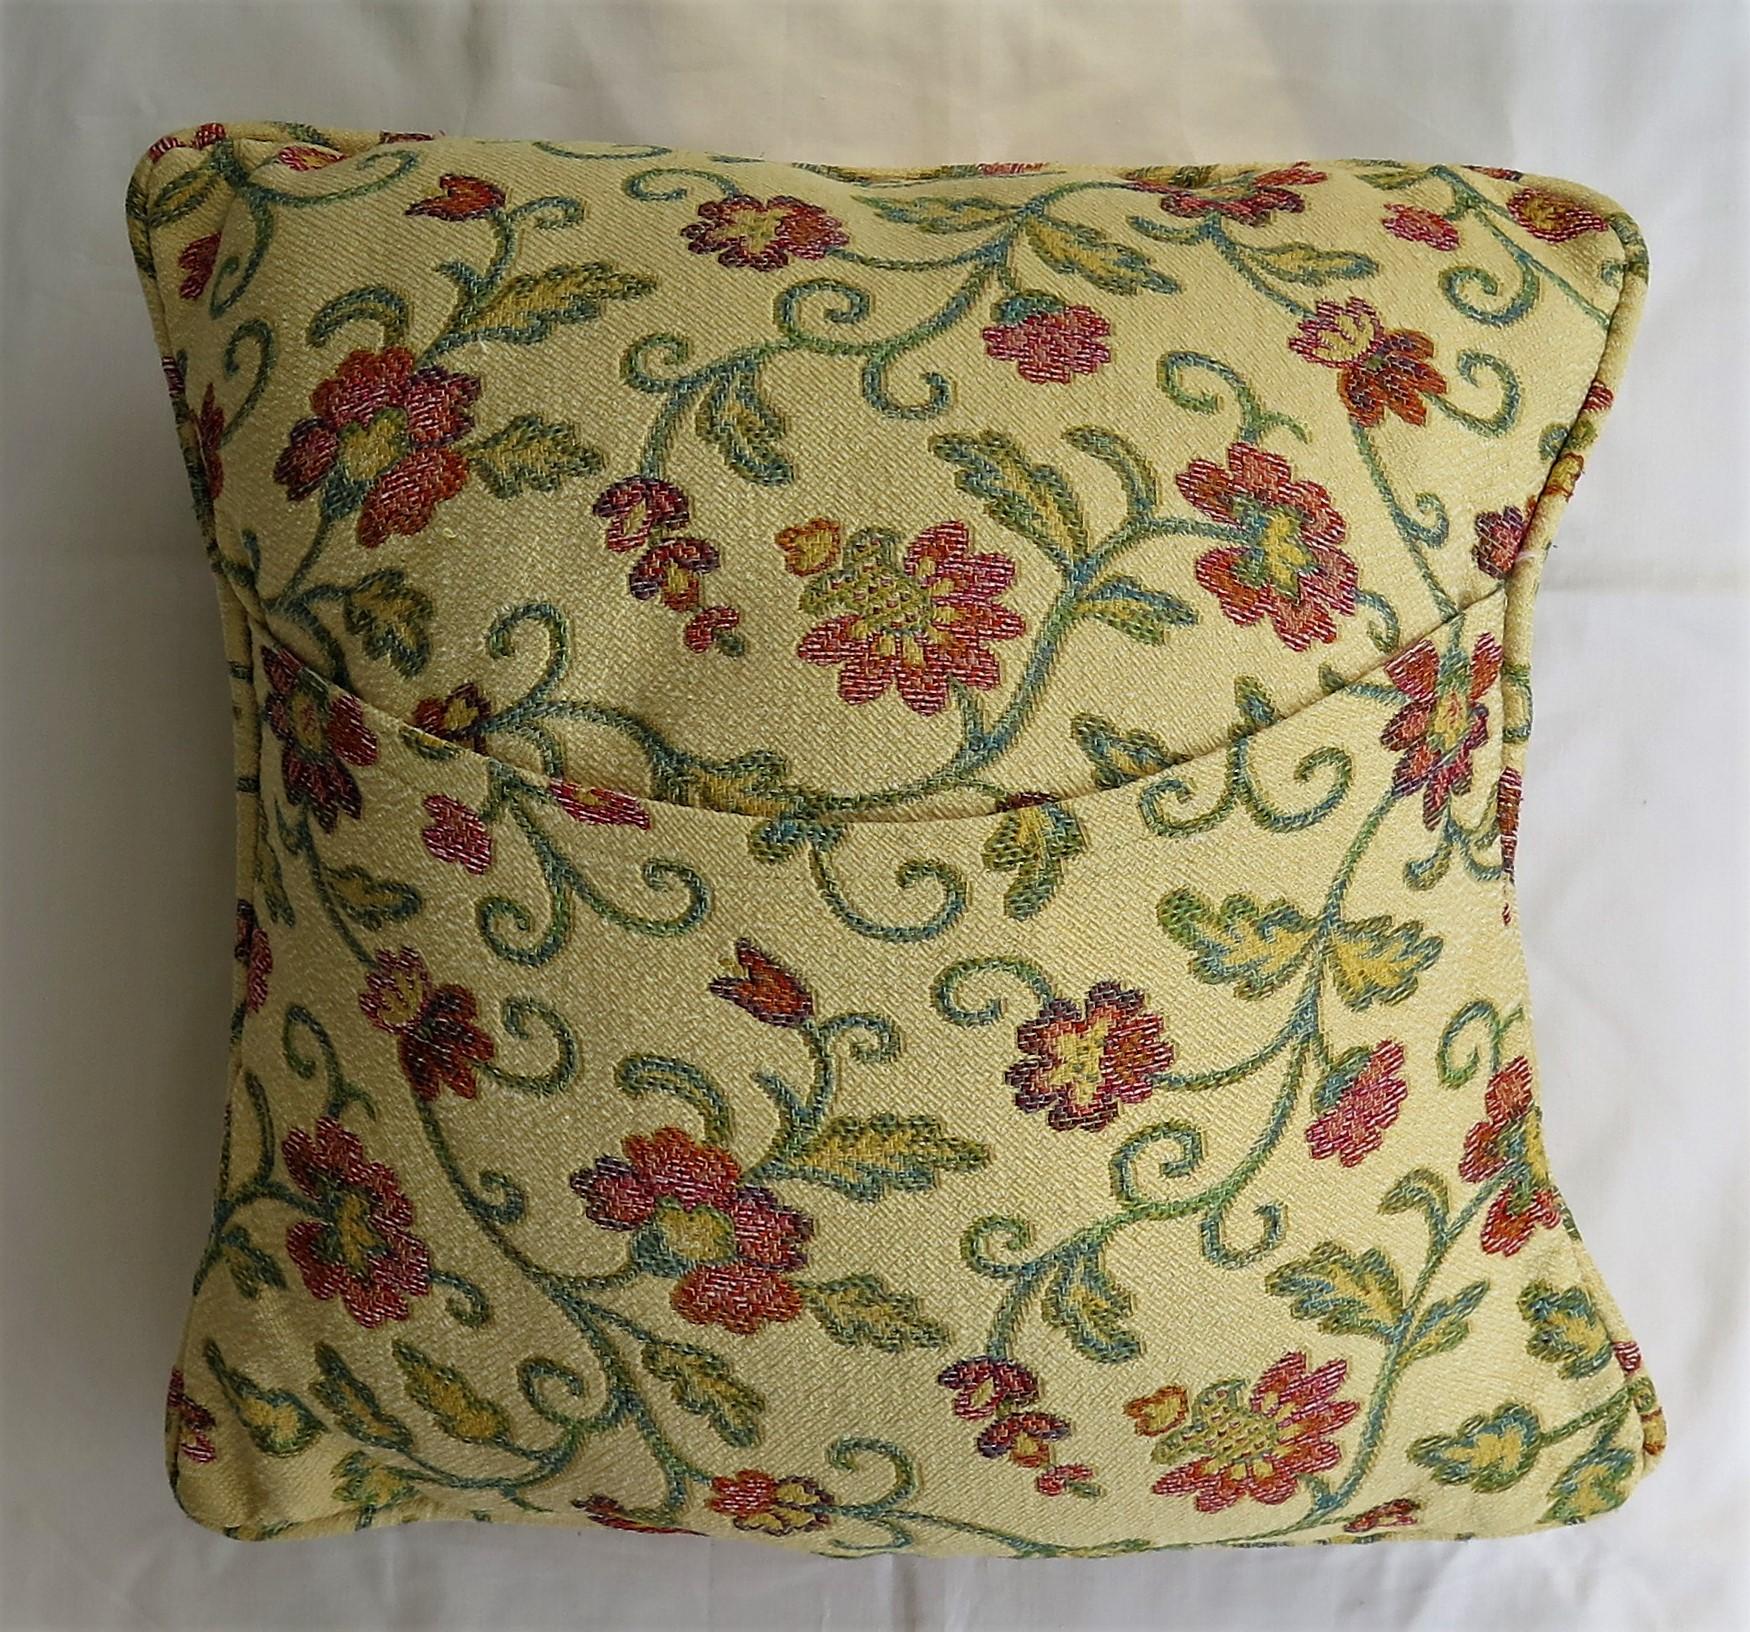 Woven Cushion or Pillow in Art Nouveau Floral Vine Style, 20th Century For Sale 3